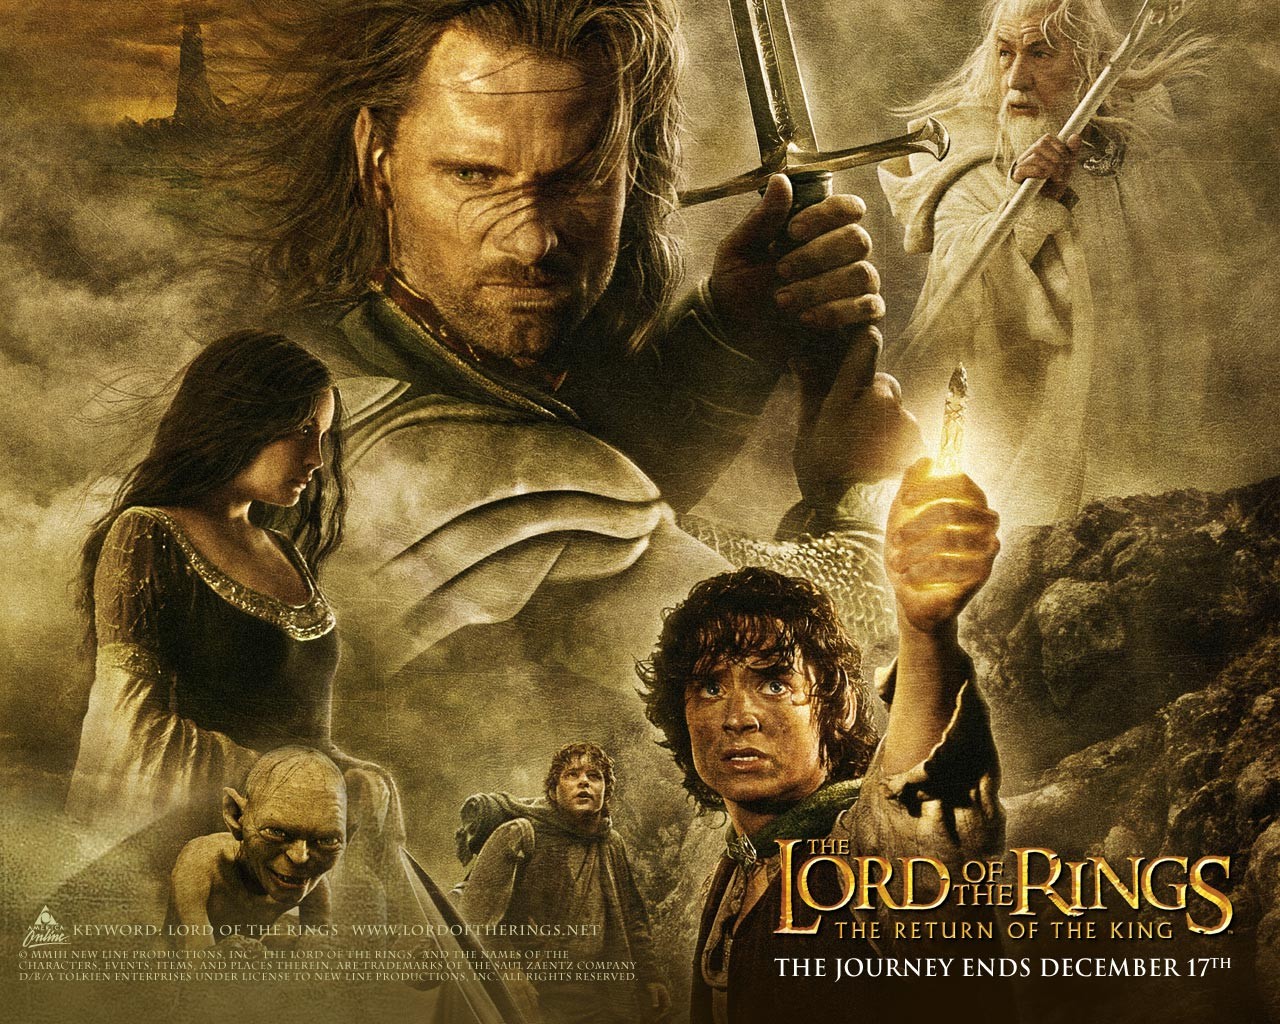 The Lord of the Rings: The Return of the King news